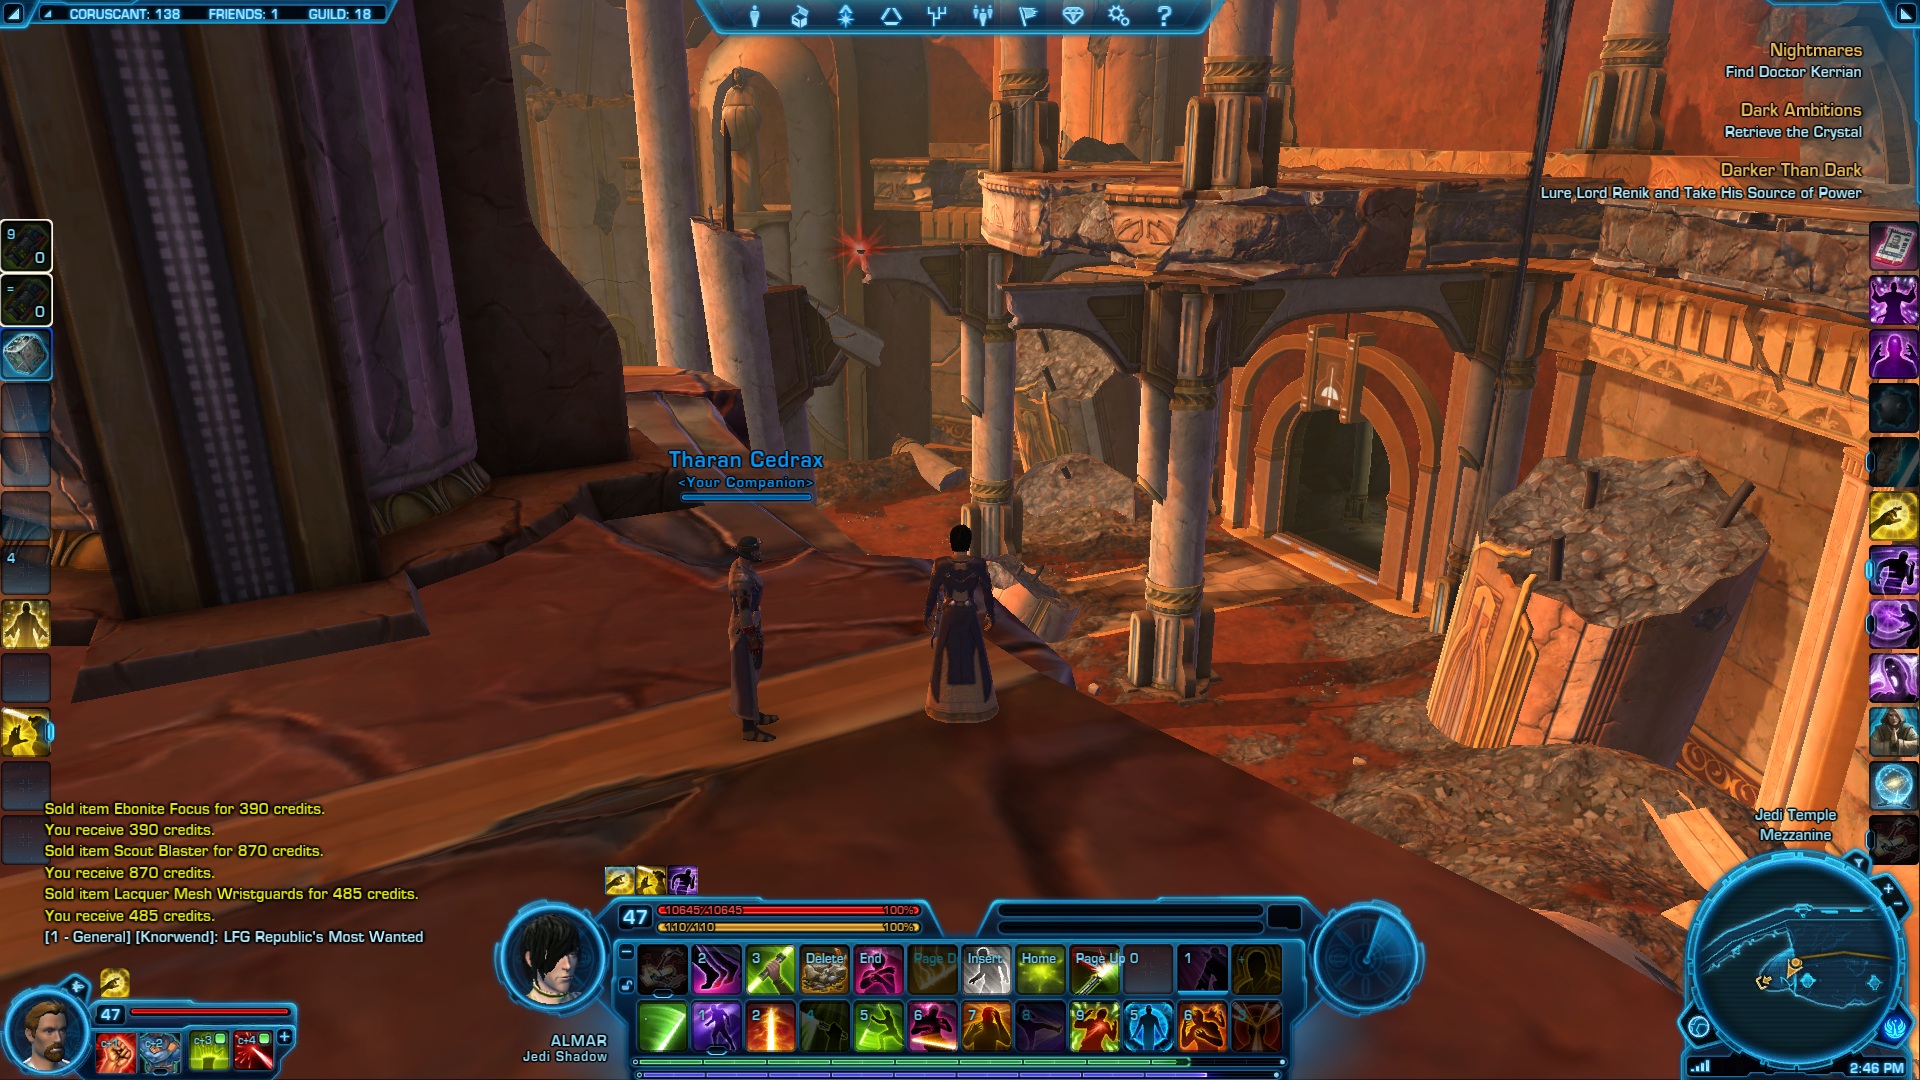 Coruscant Strength Datacron in the distance